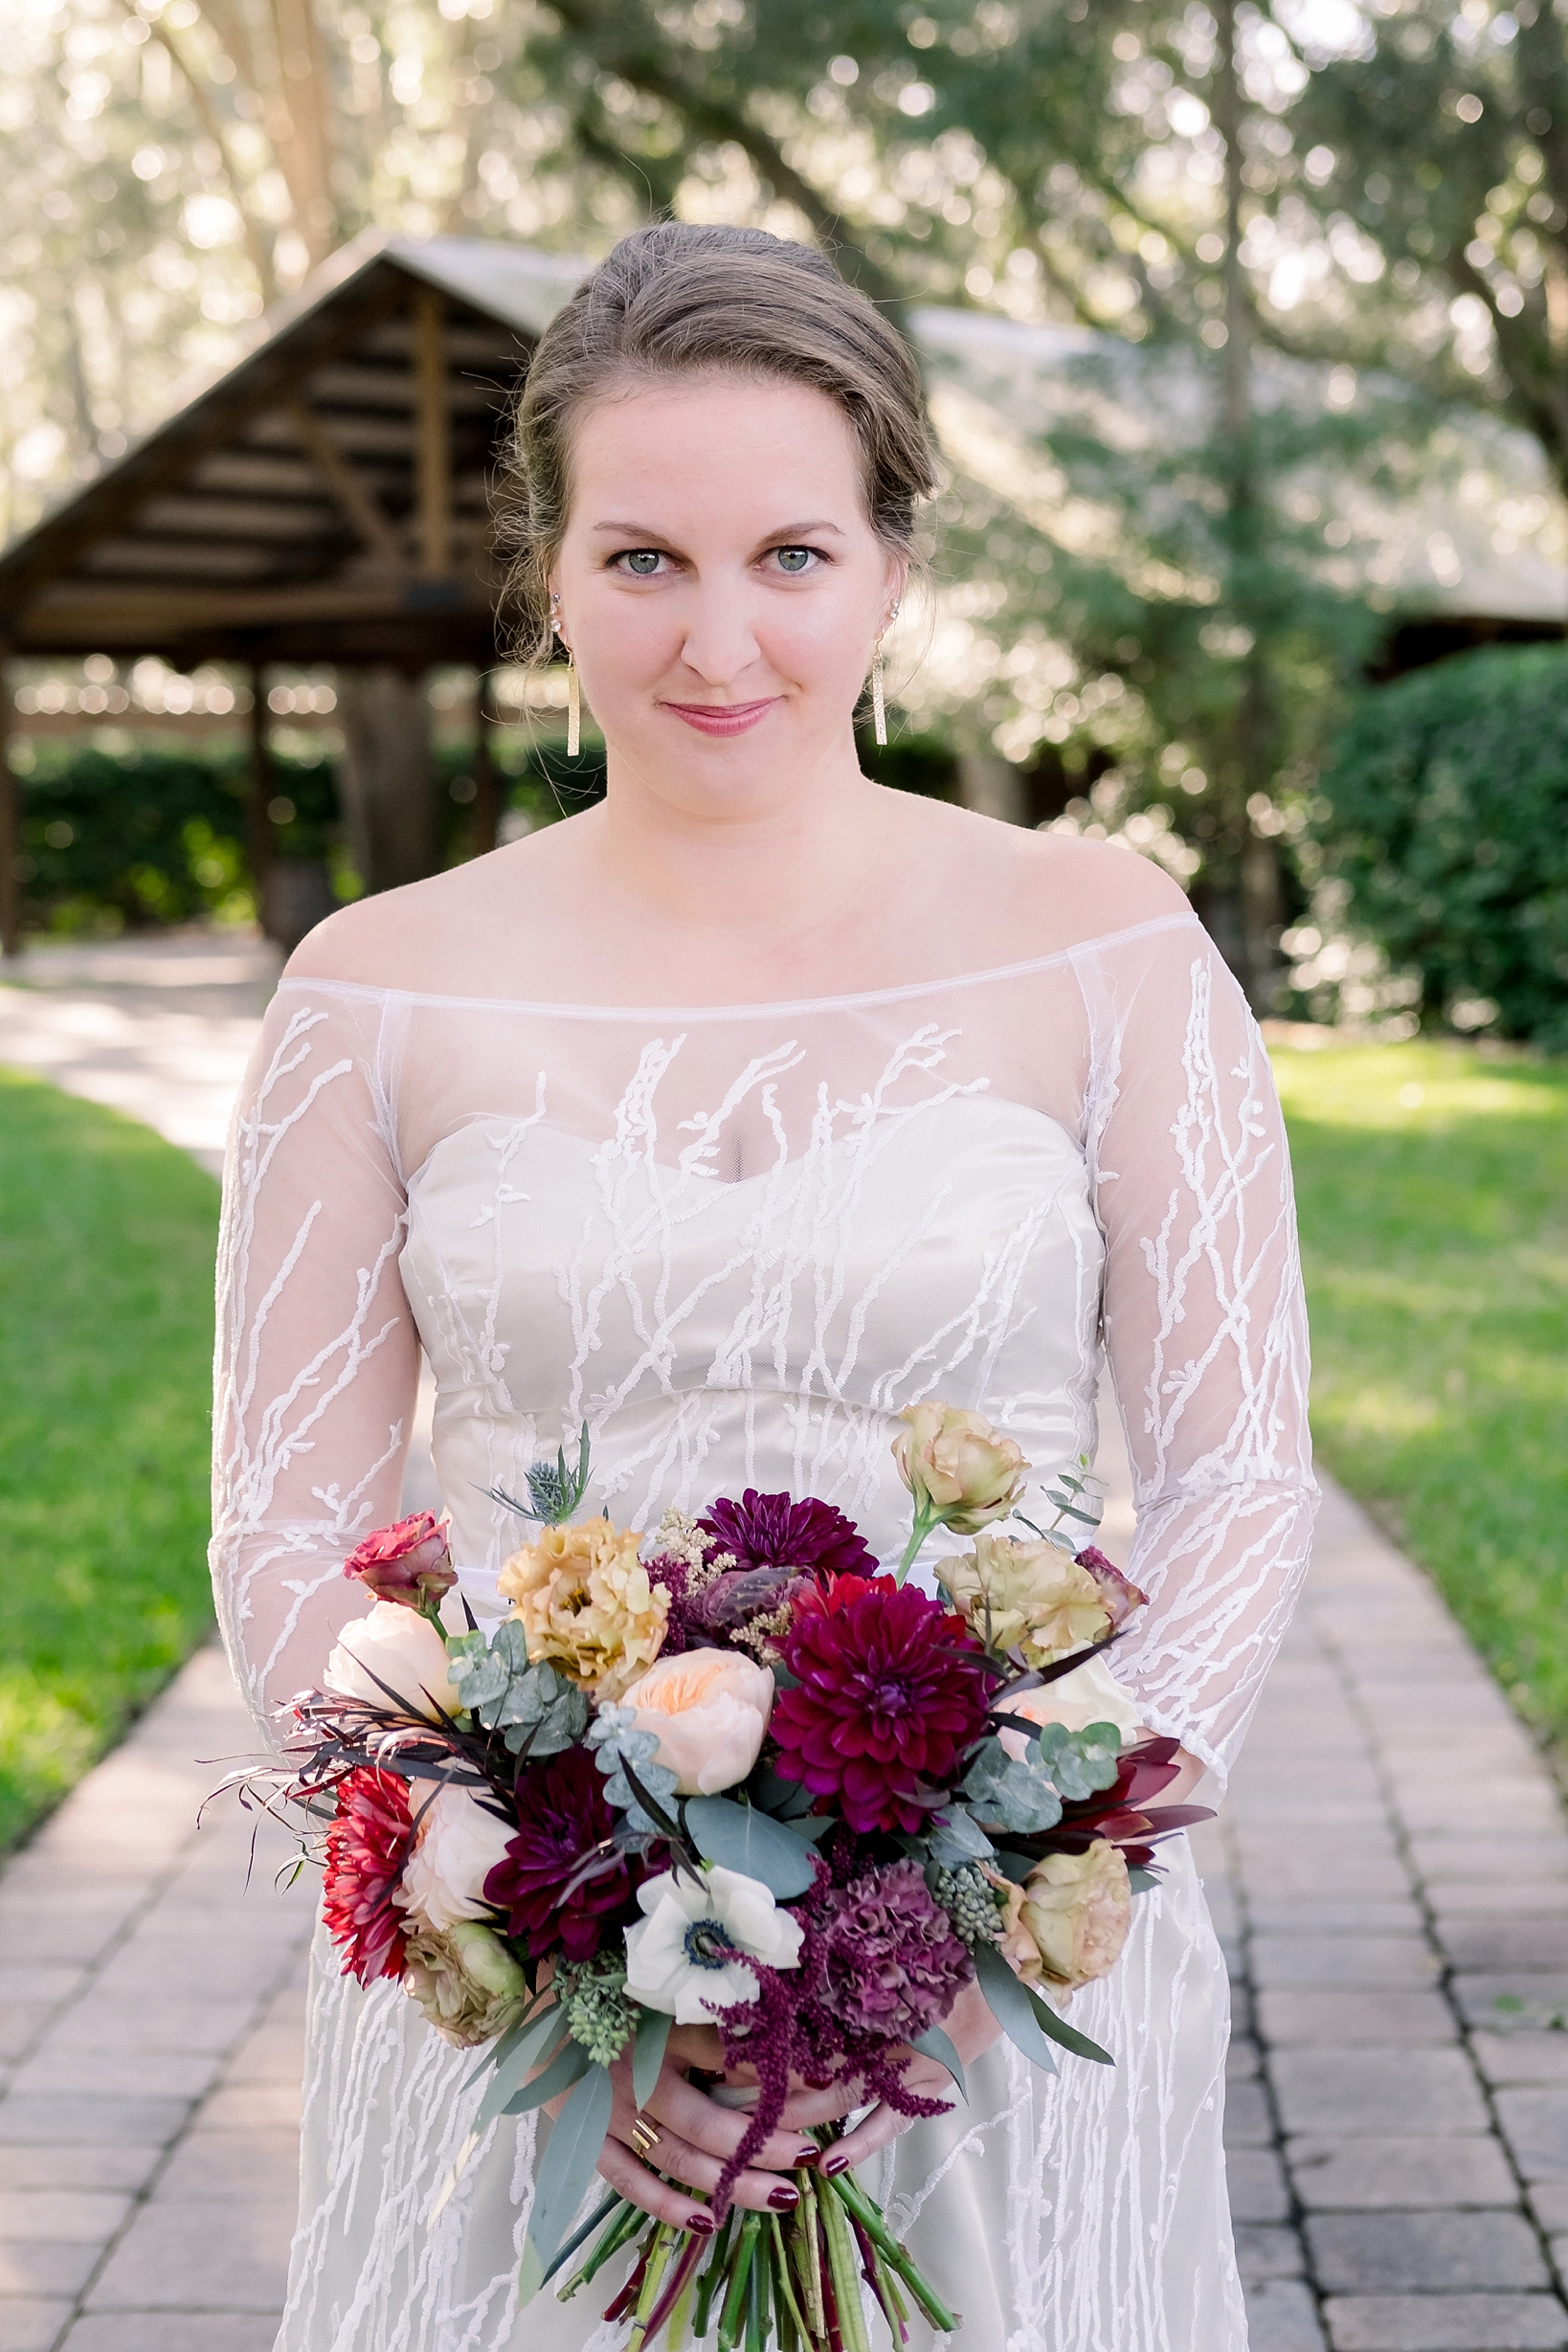 Waist up shot of the Bride holding her flowers as she looks into the camera